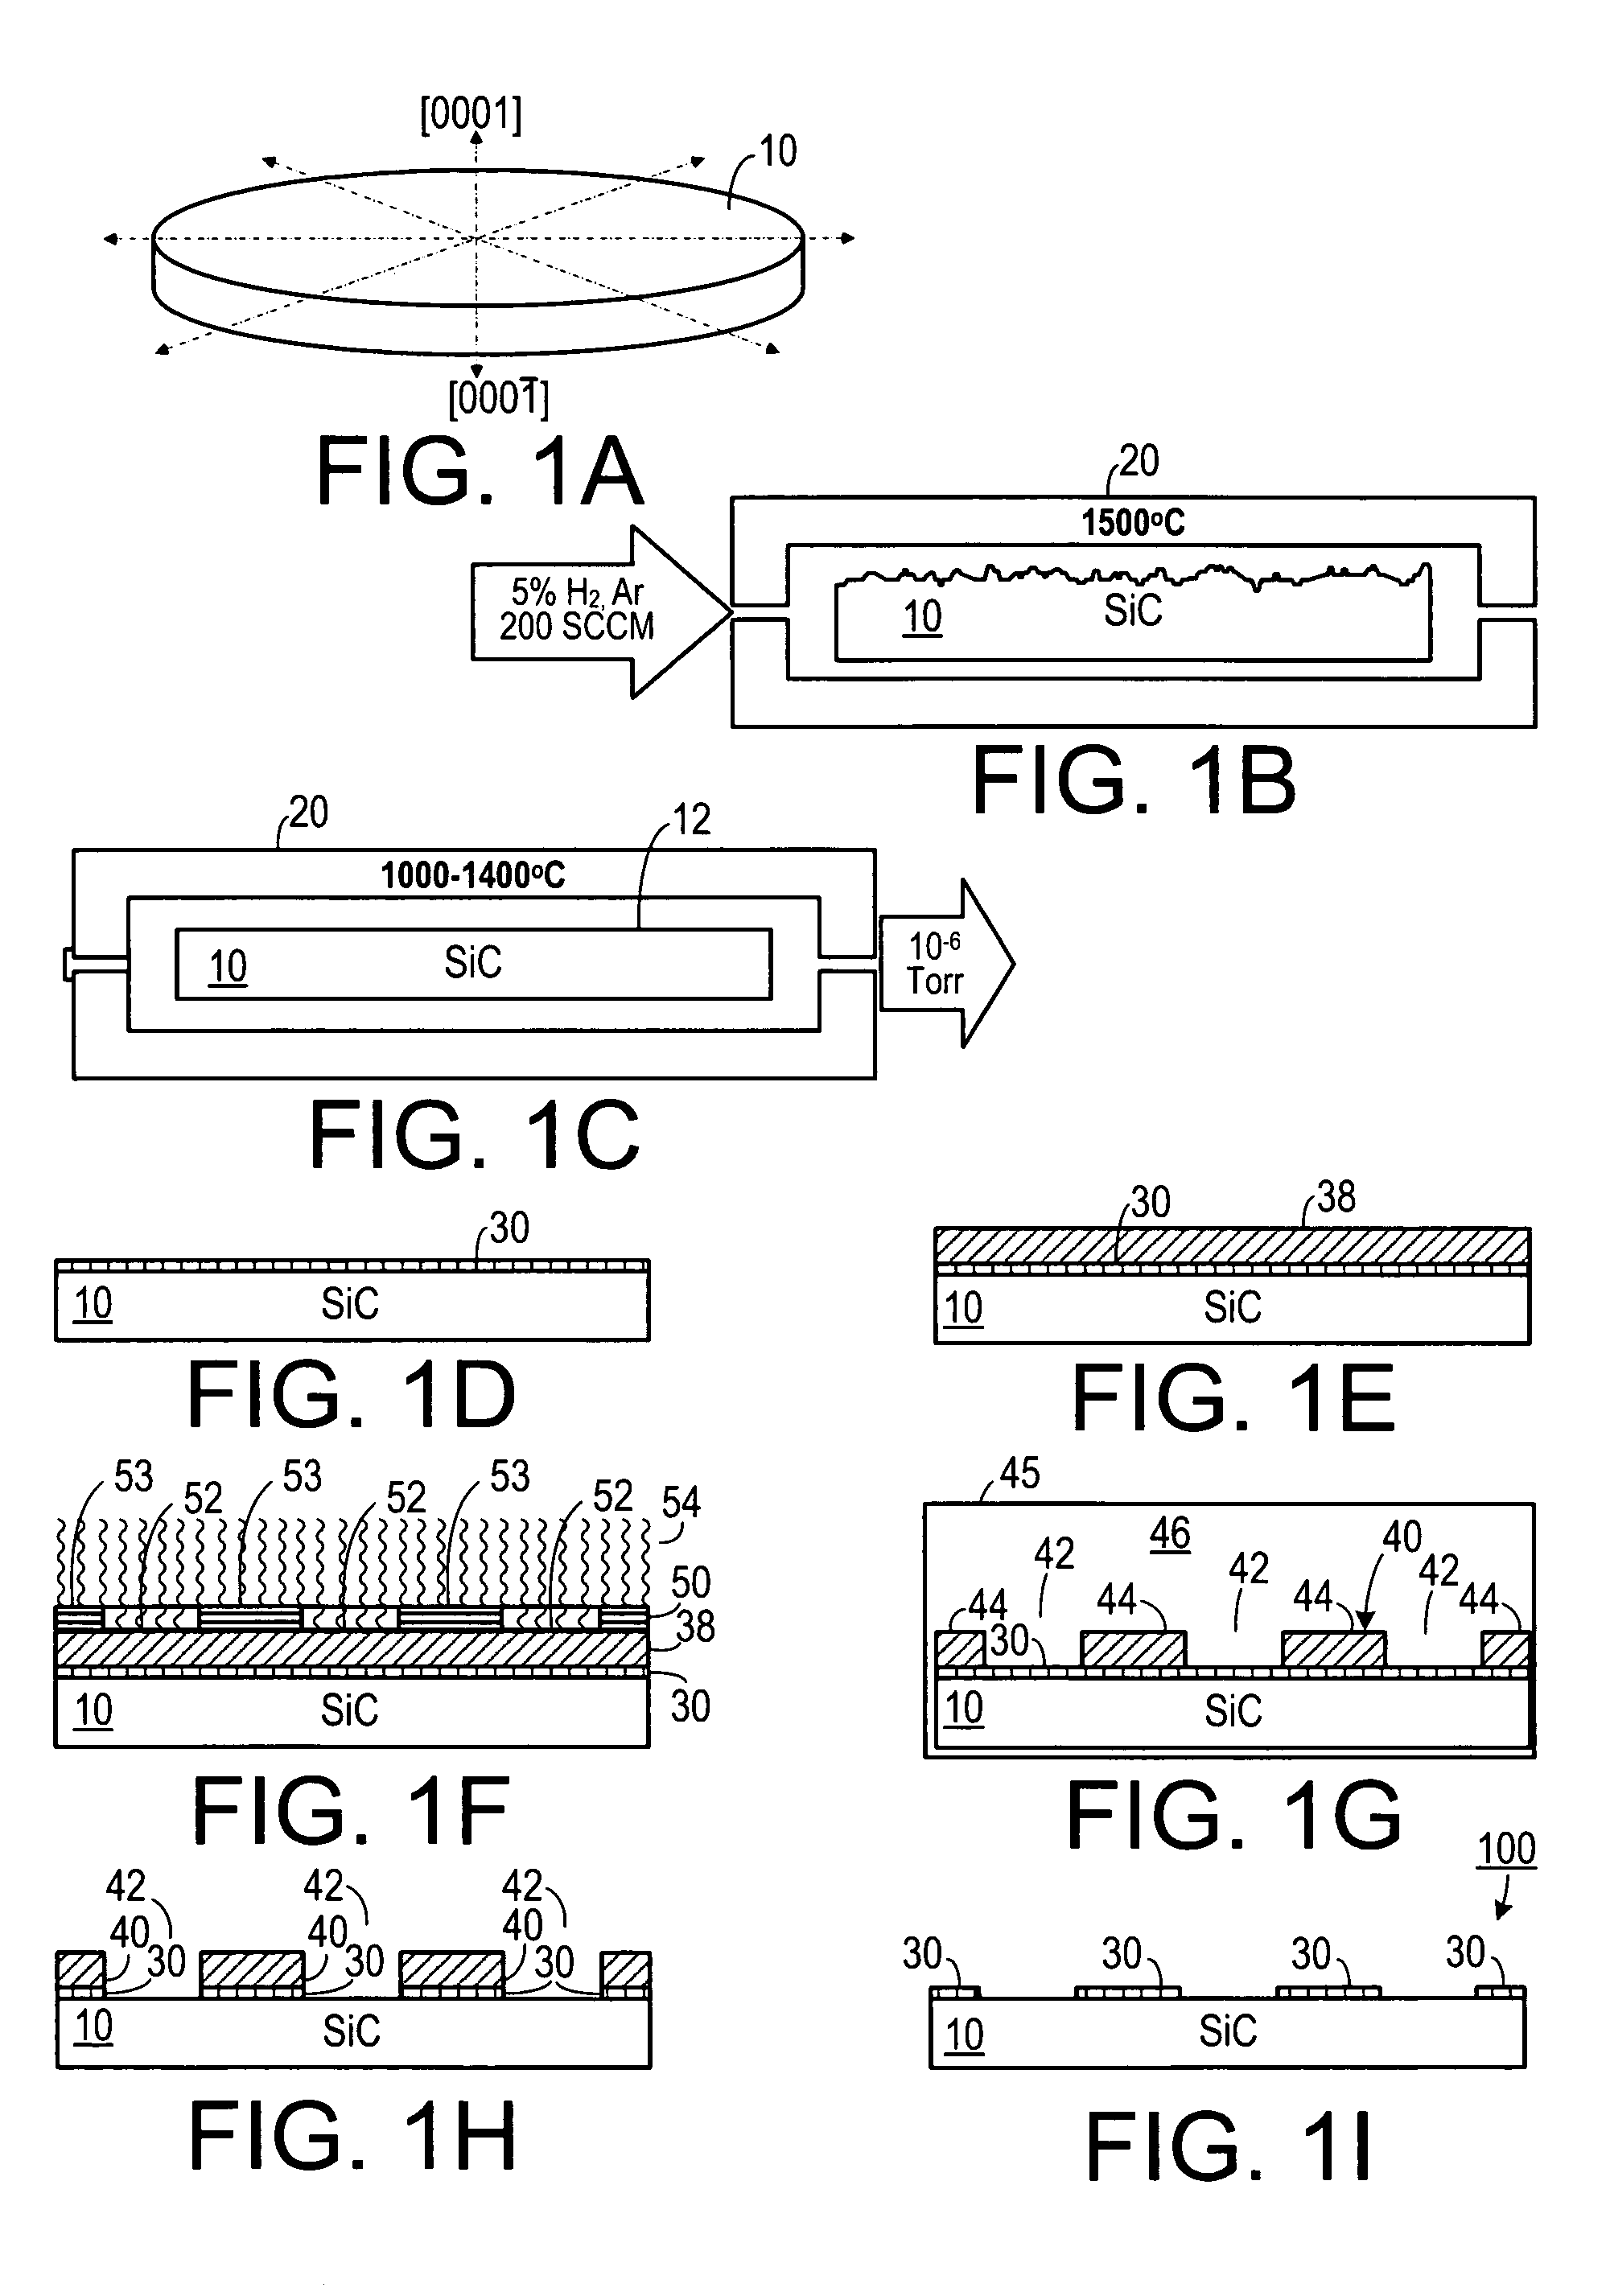 Patterned thin film graphite devices and method for making same